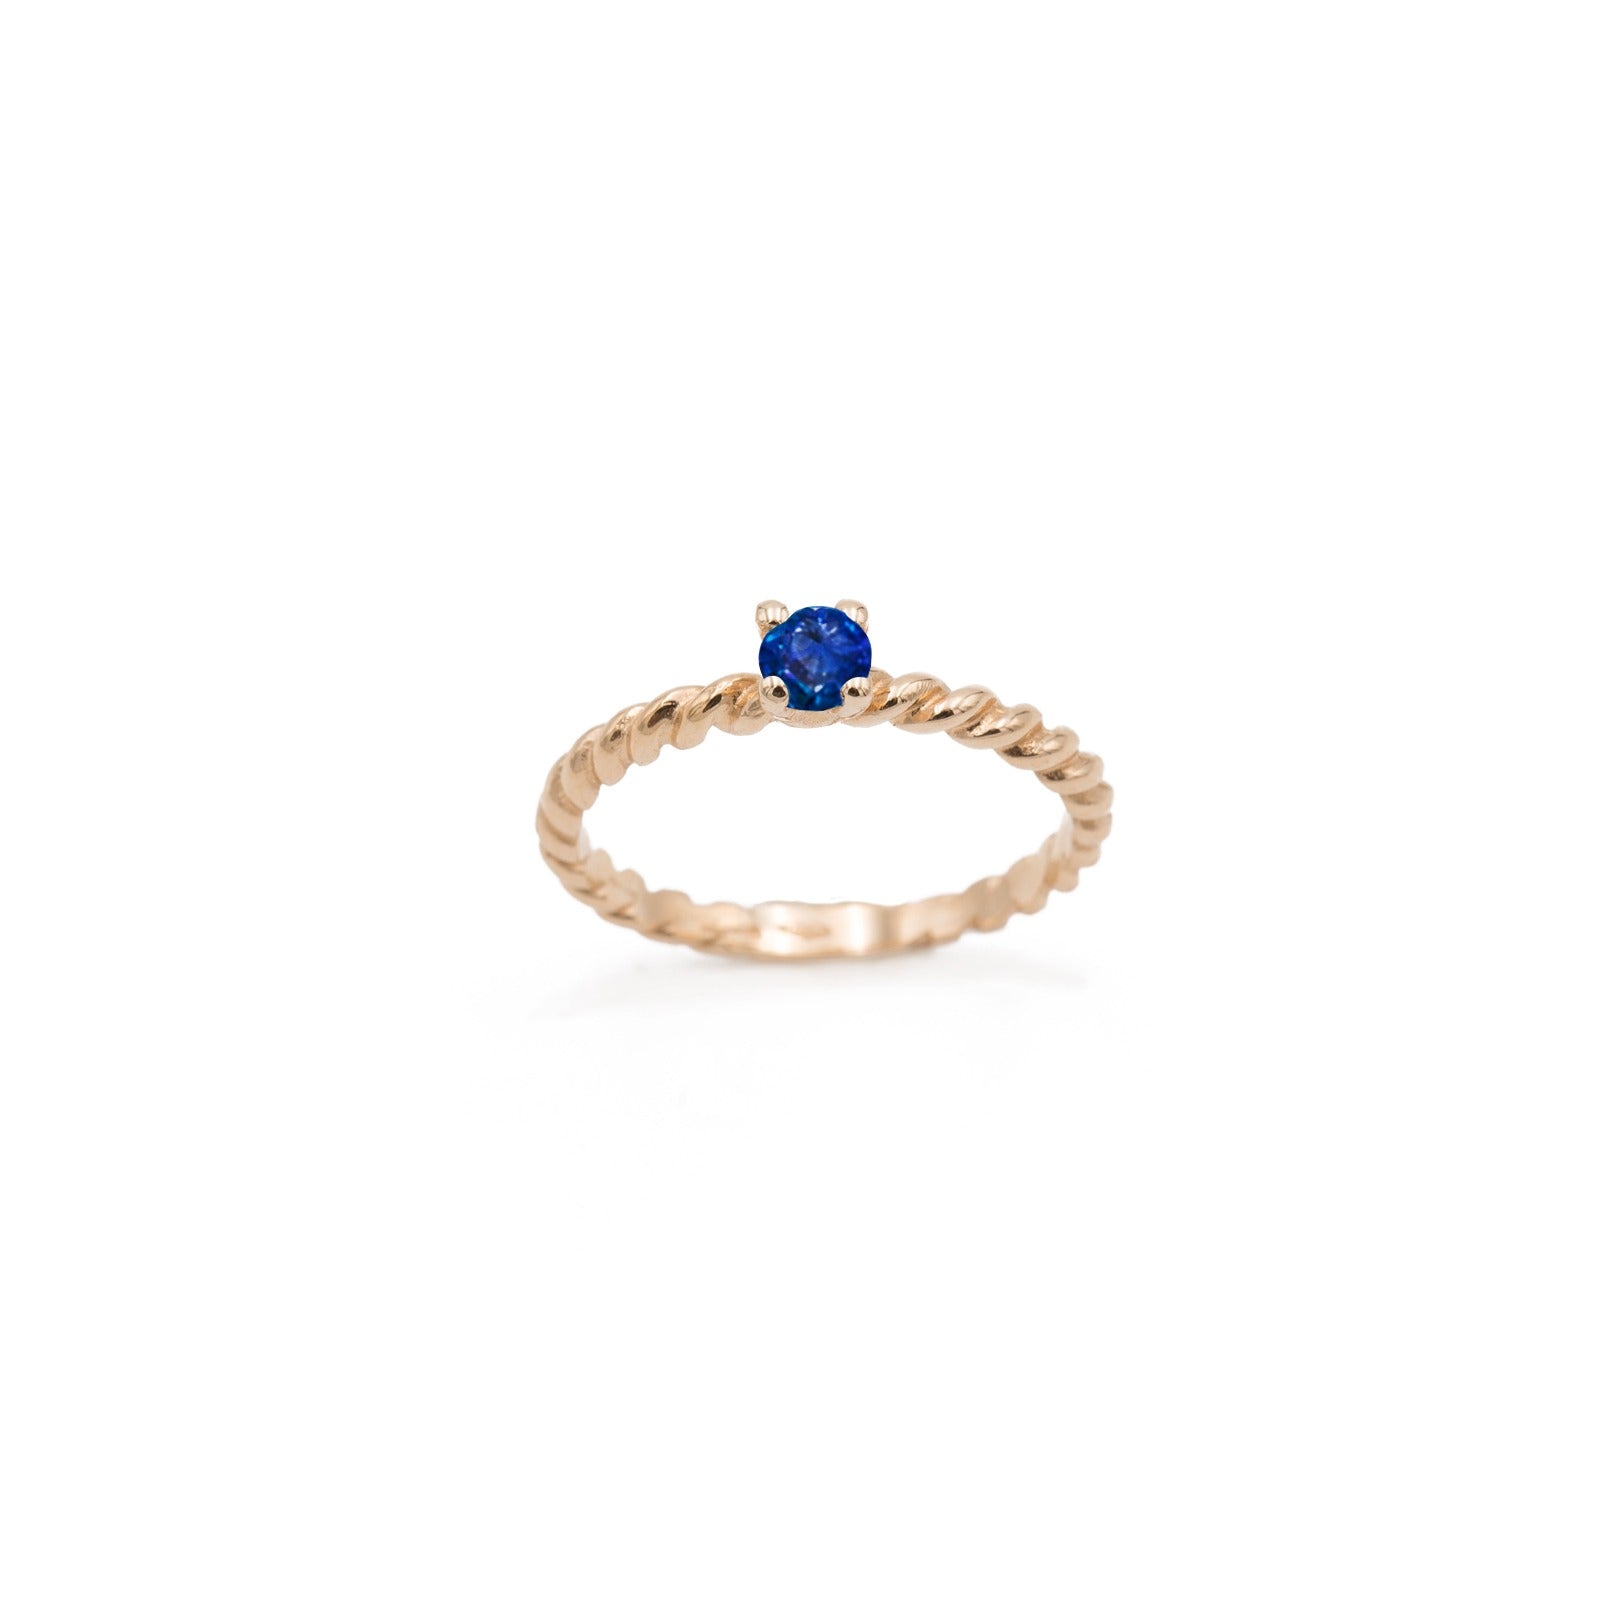 Rose gold braided ring with central sapphire